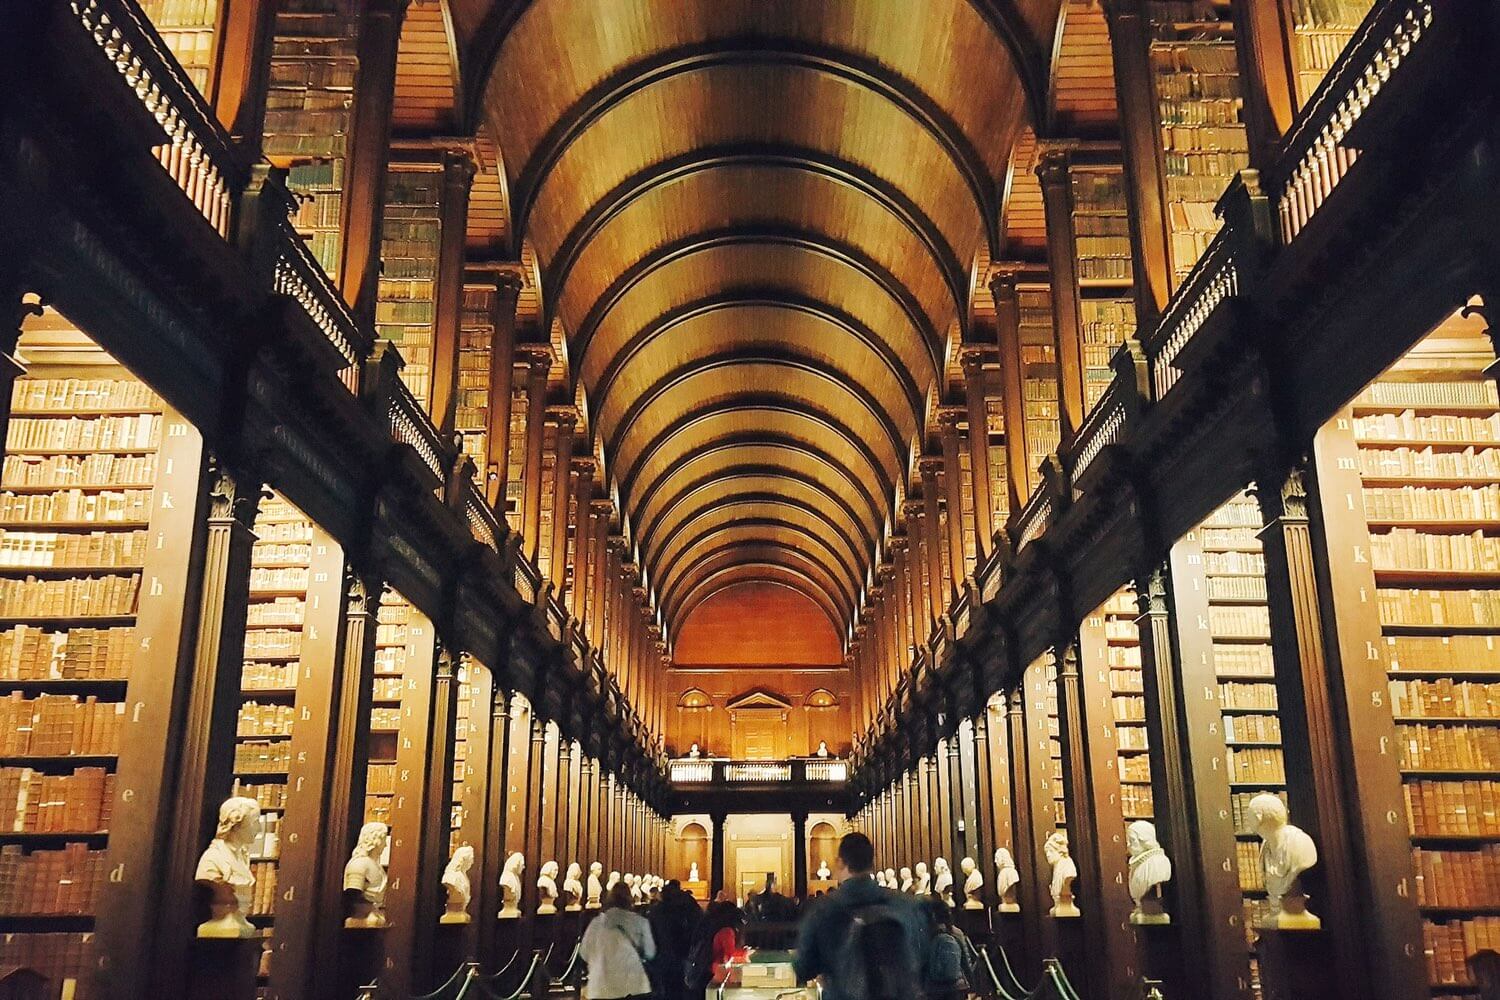 Old Library, Dublin, home of the Book of Kells